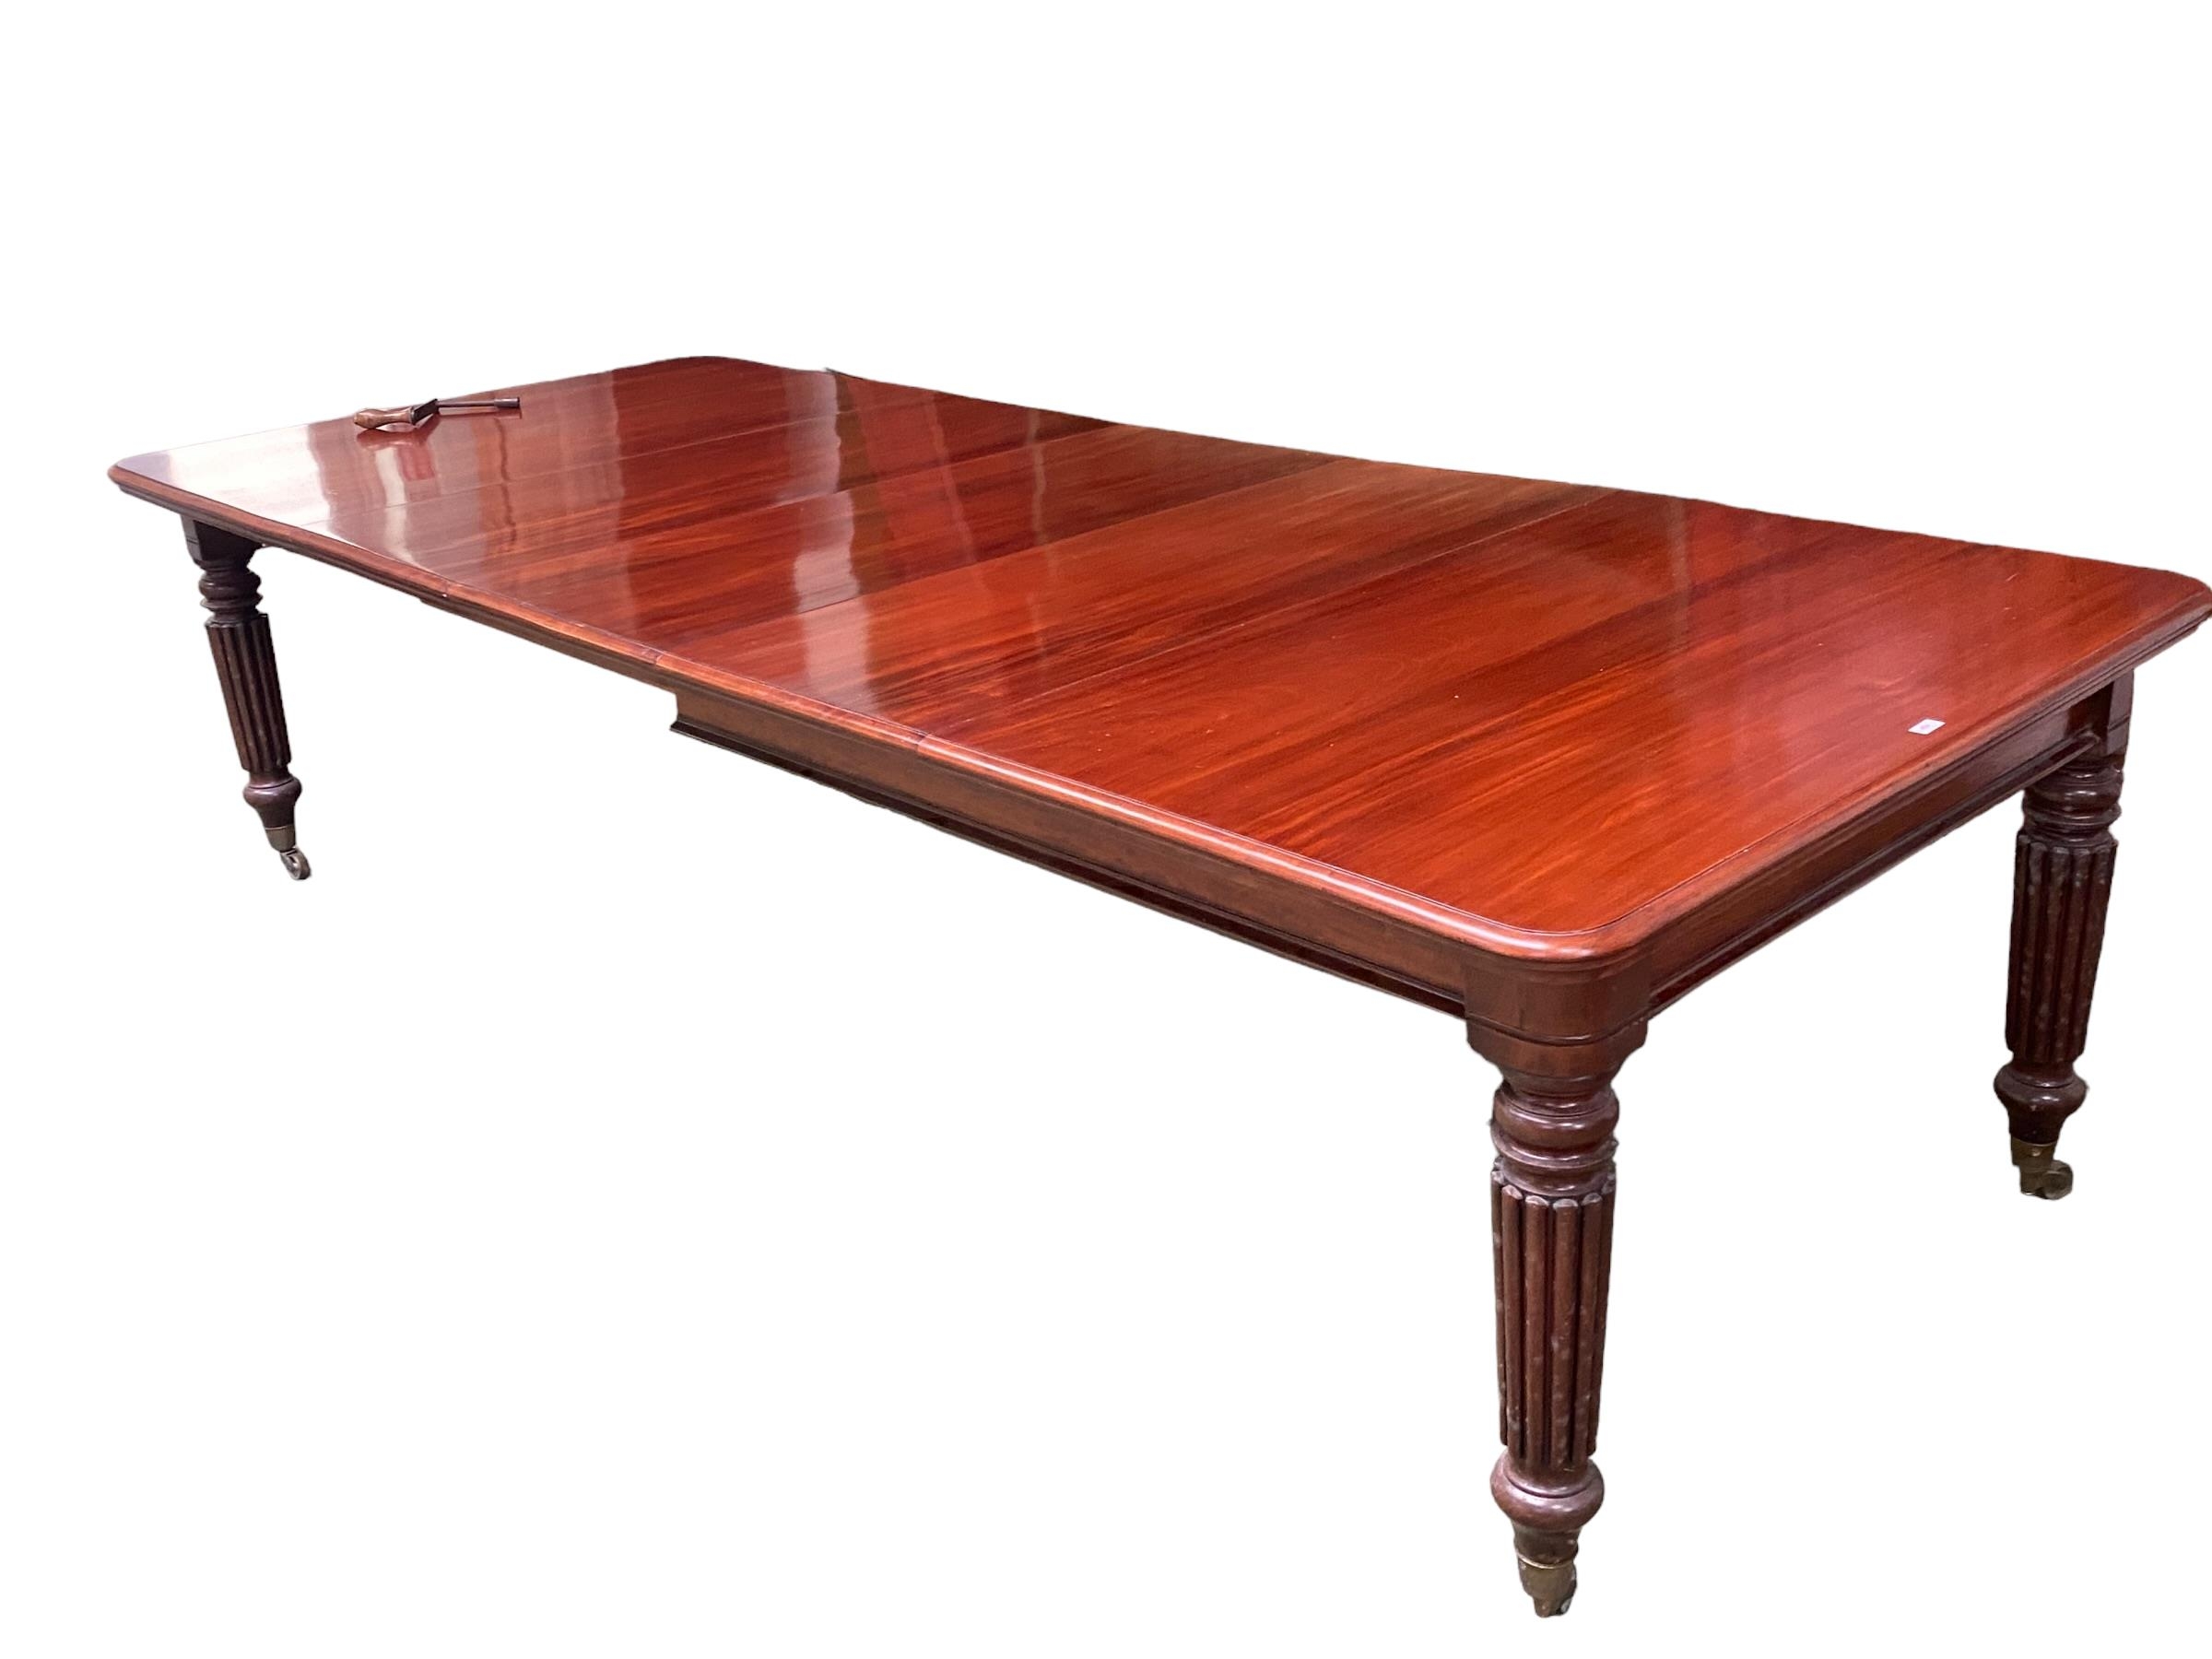 Victorian mahogany extending oblong dining table, on 4 tapering reeded legs, with brass castors, 3